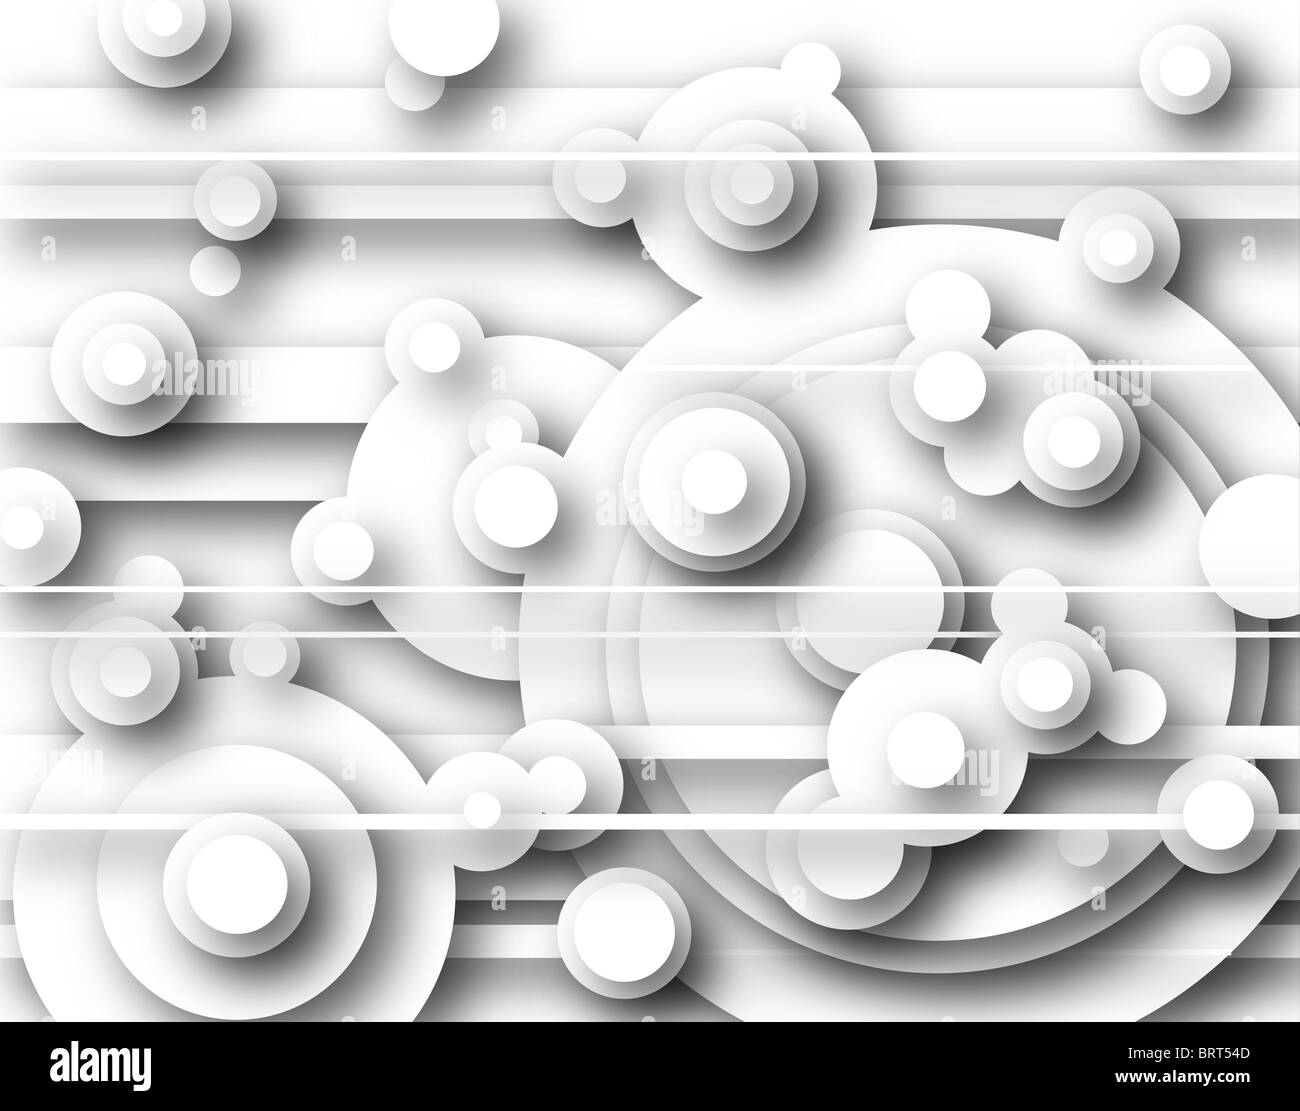 Abstract illustrated background of white cutout circles Stock Photo